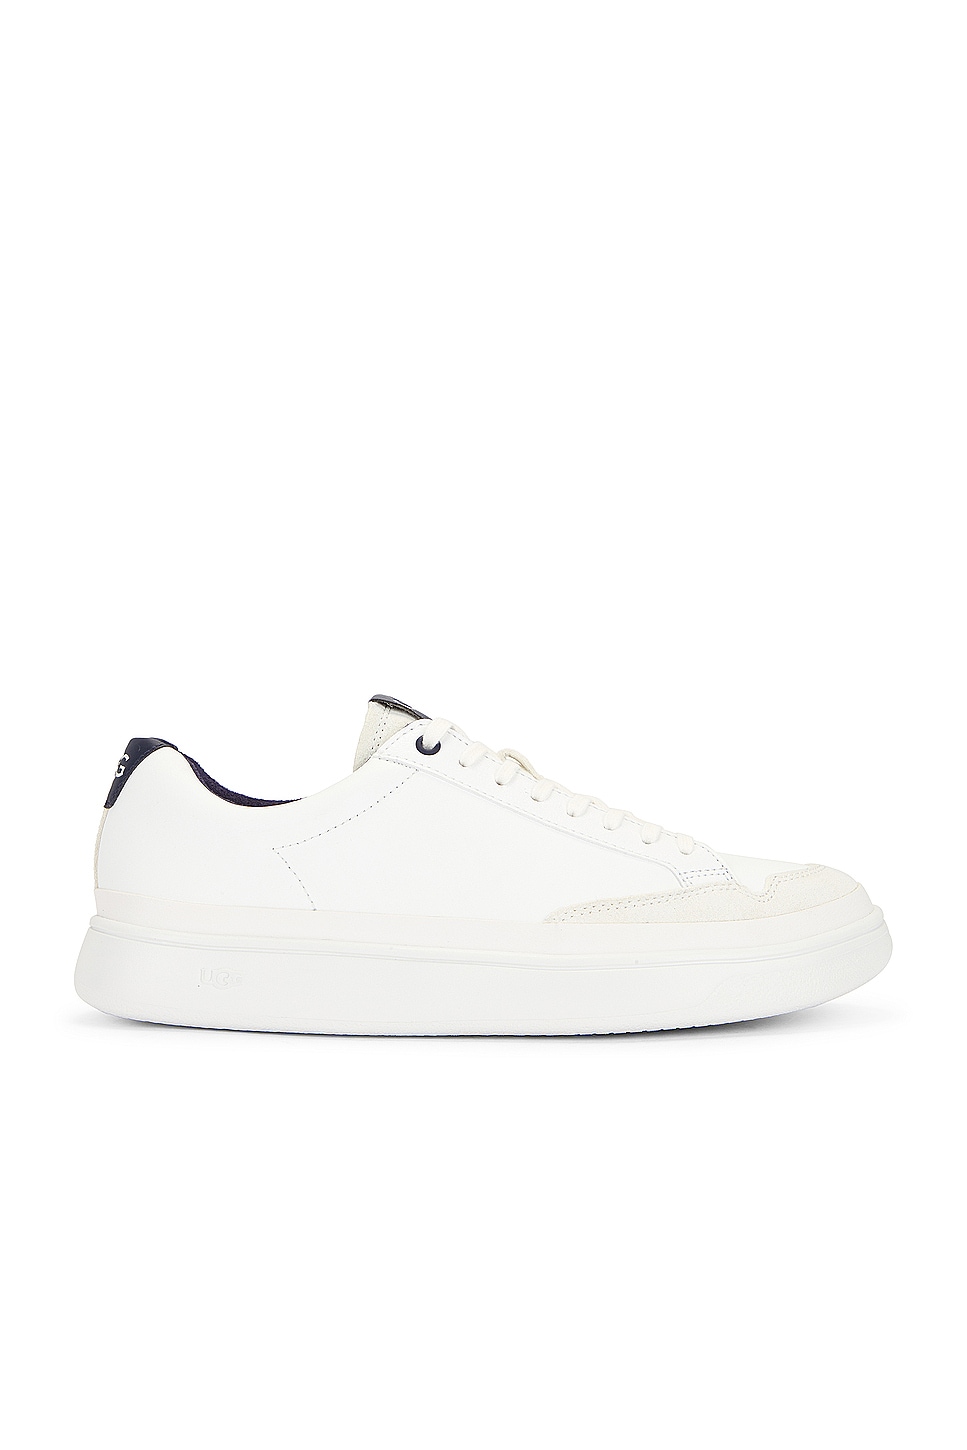 Image 1 of UGG South Bay Low Sneaker in White